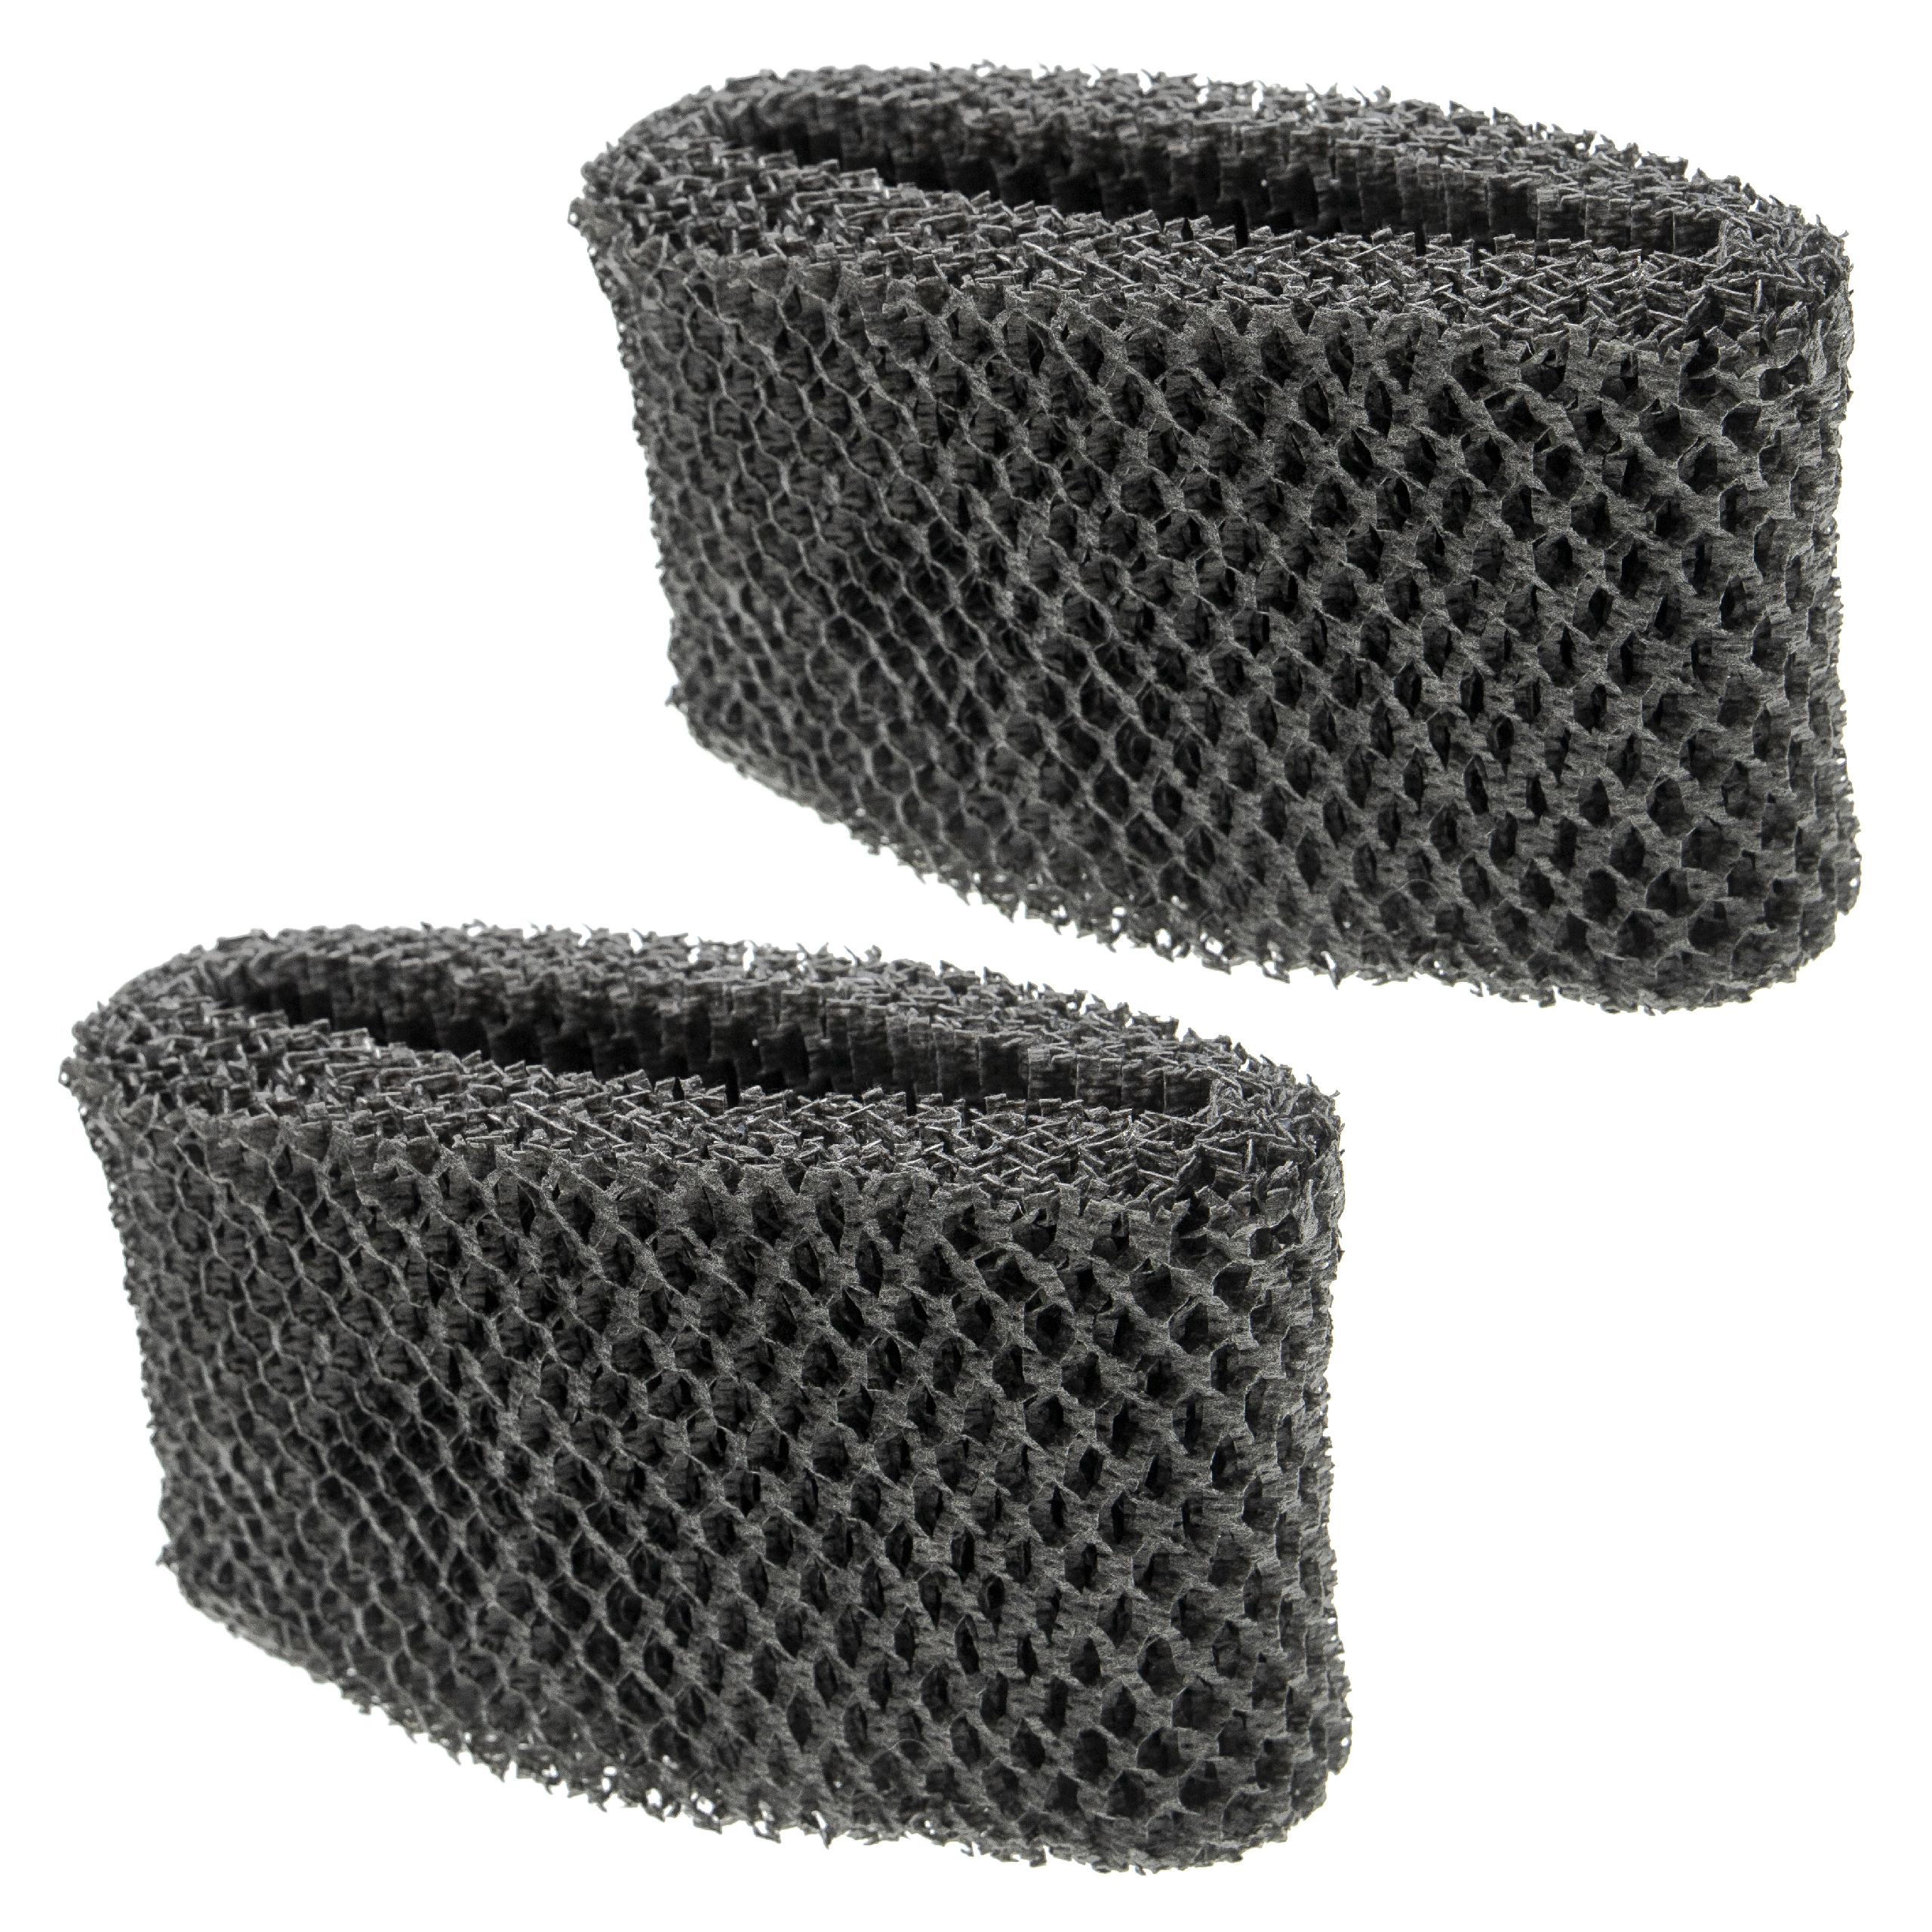 2x Filter replaces Philips HU4102/01, FY2401/10 for Humidifier - natural fibres in honeycomb structure